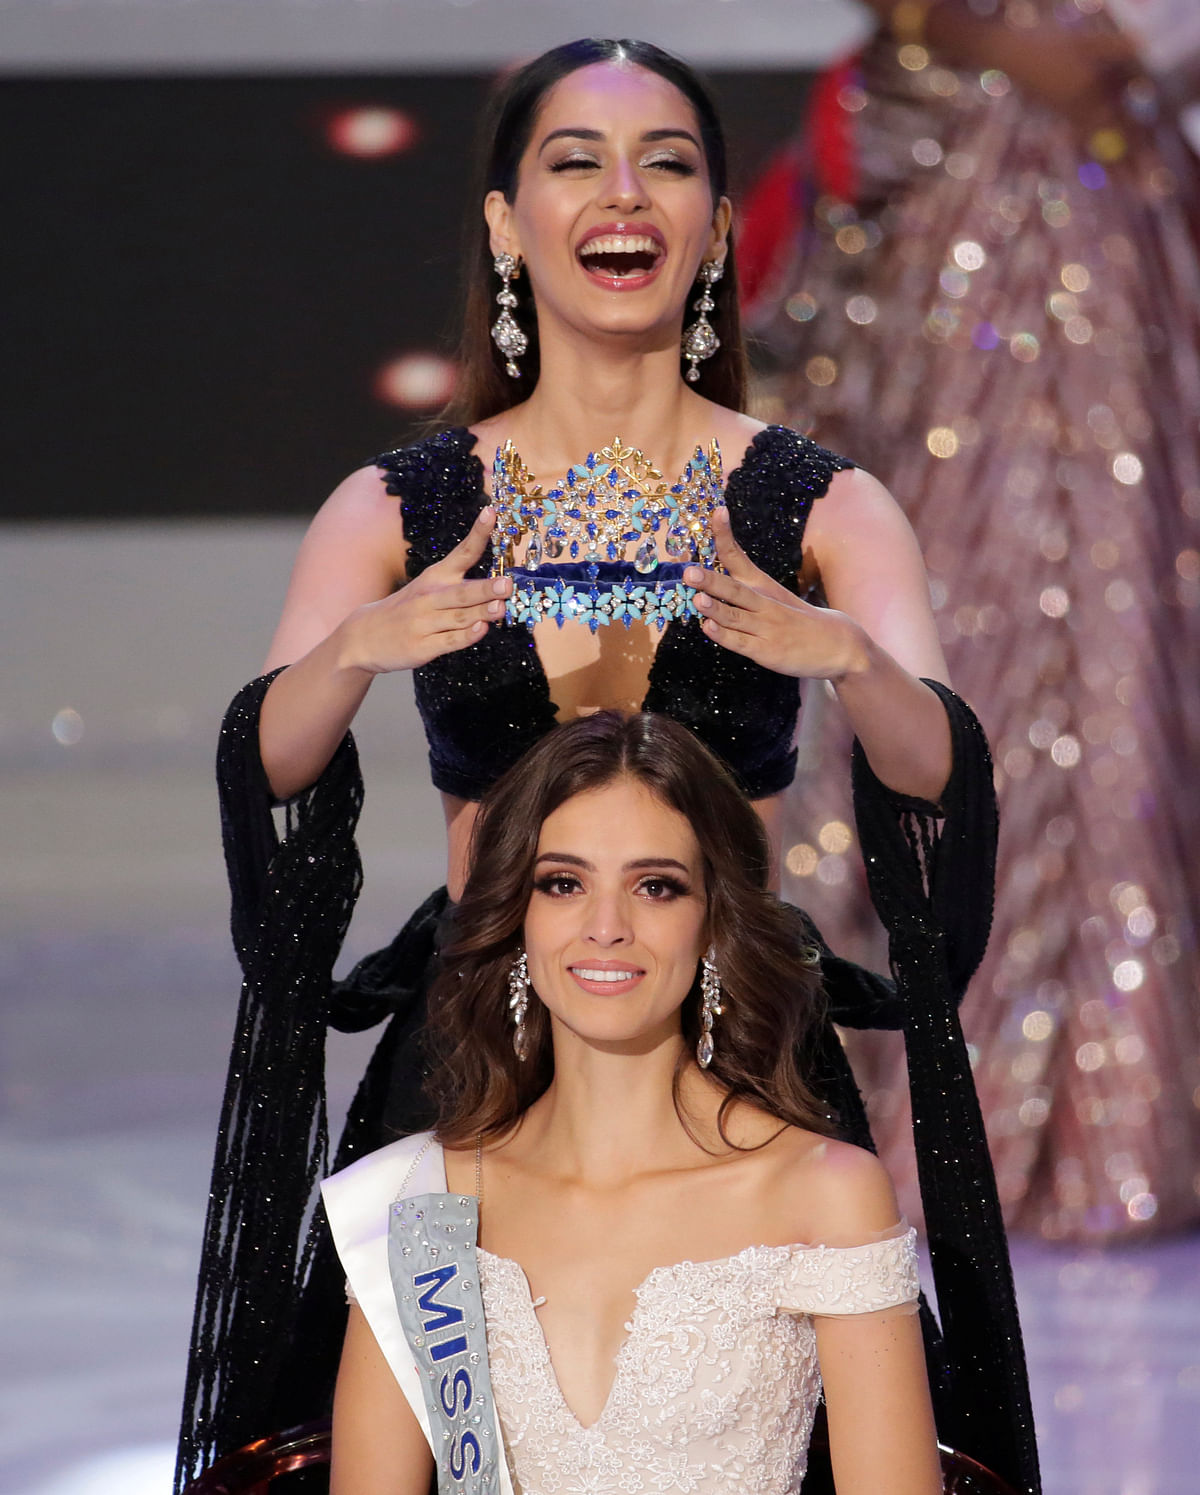 Miss Mexico Vanessa Ponce de Leon, 26, is crowned by former Miss World 2017 India’s Manushi Chhillar as she wins the Miss World 2018 title in Sanya, Hainan island, China 8 December, 2018. Photo: Reuters